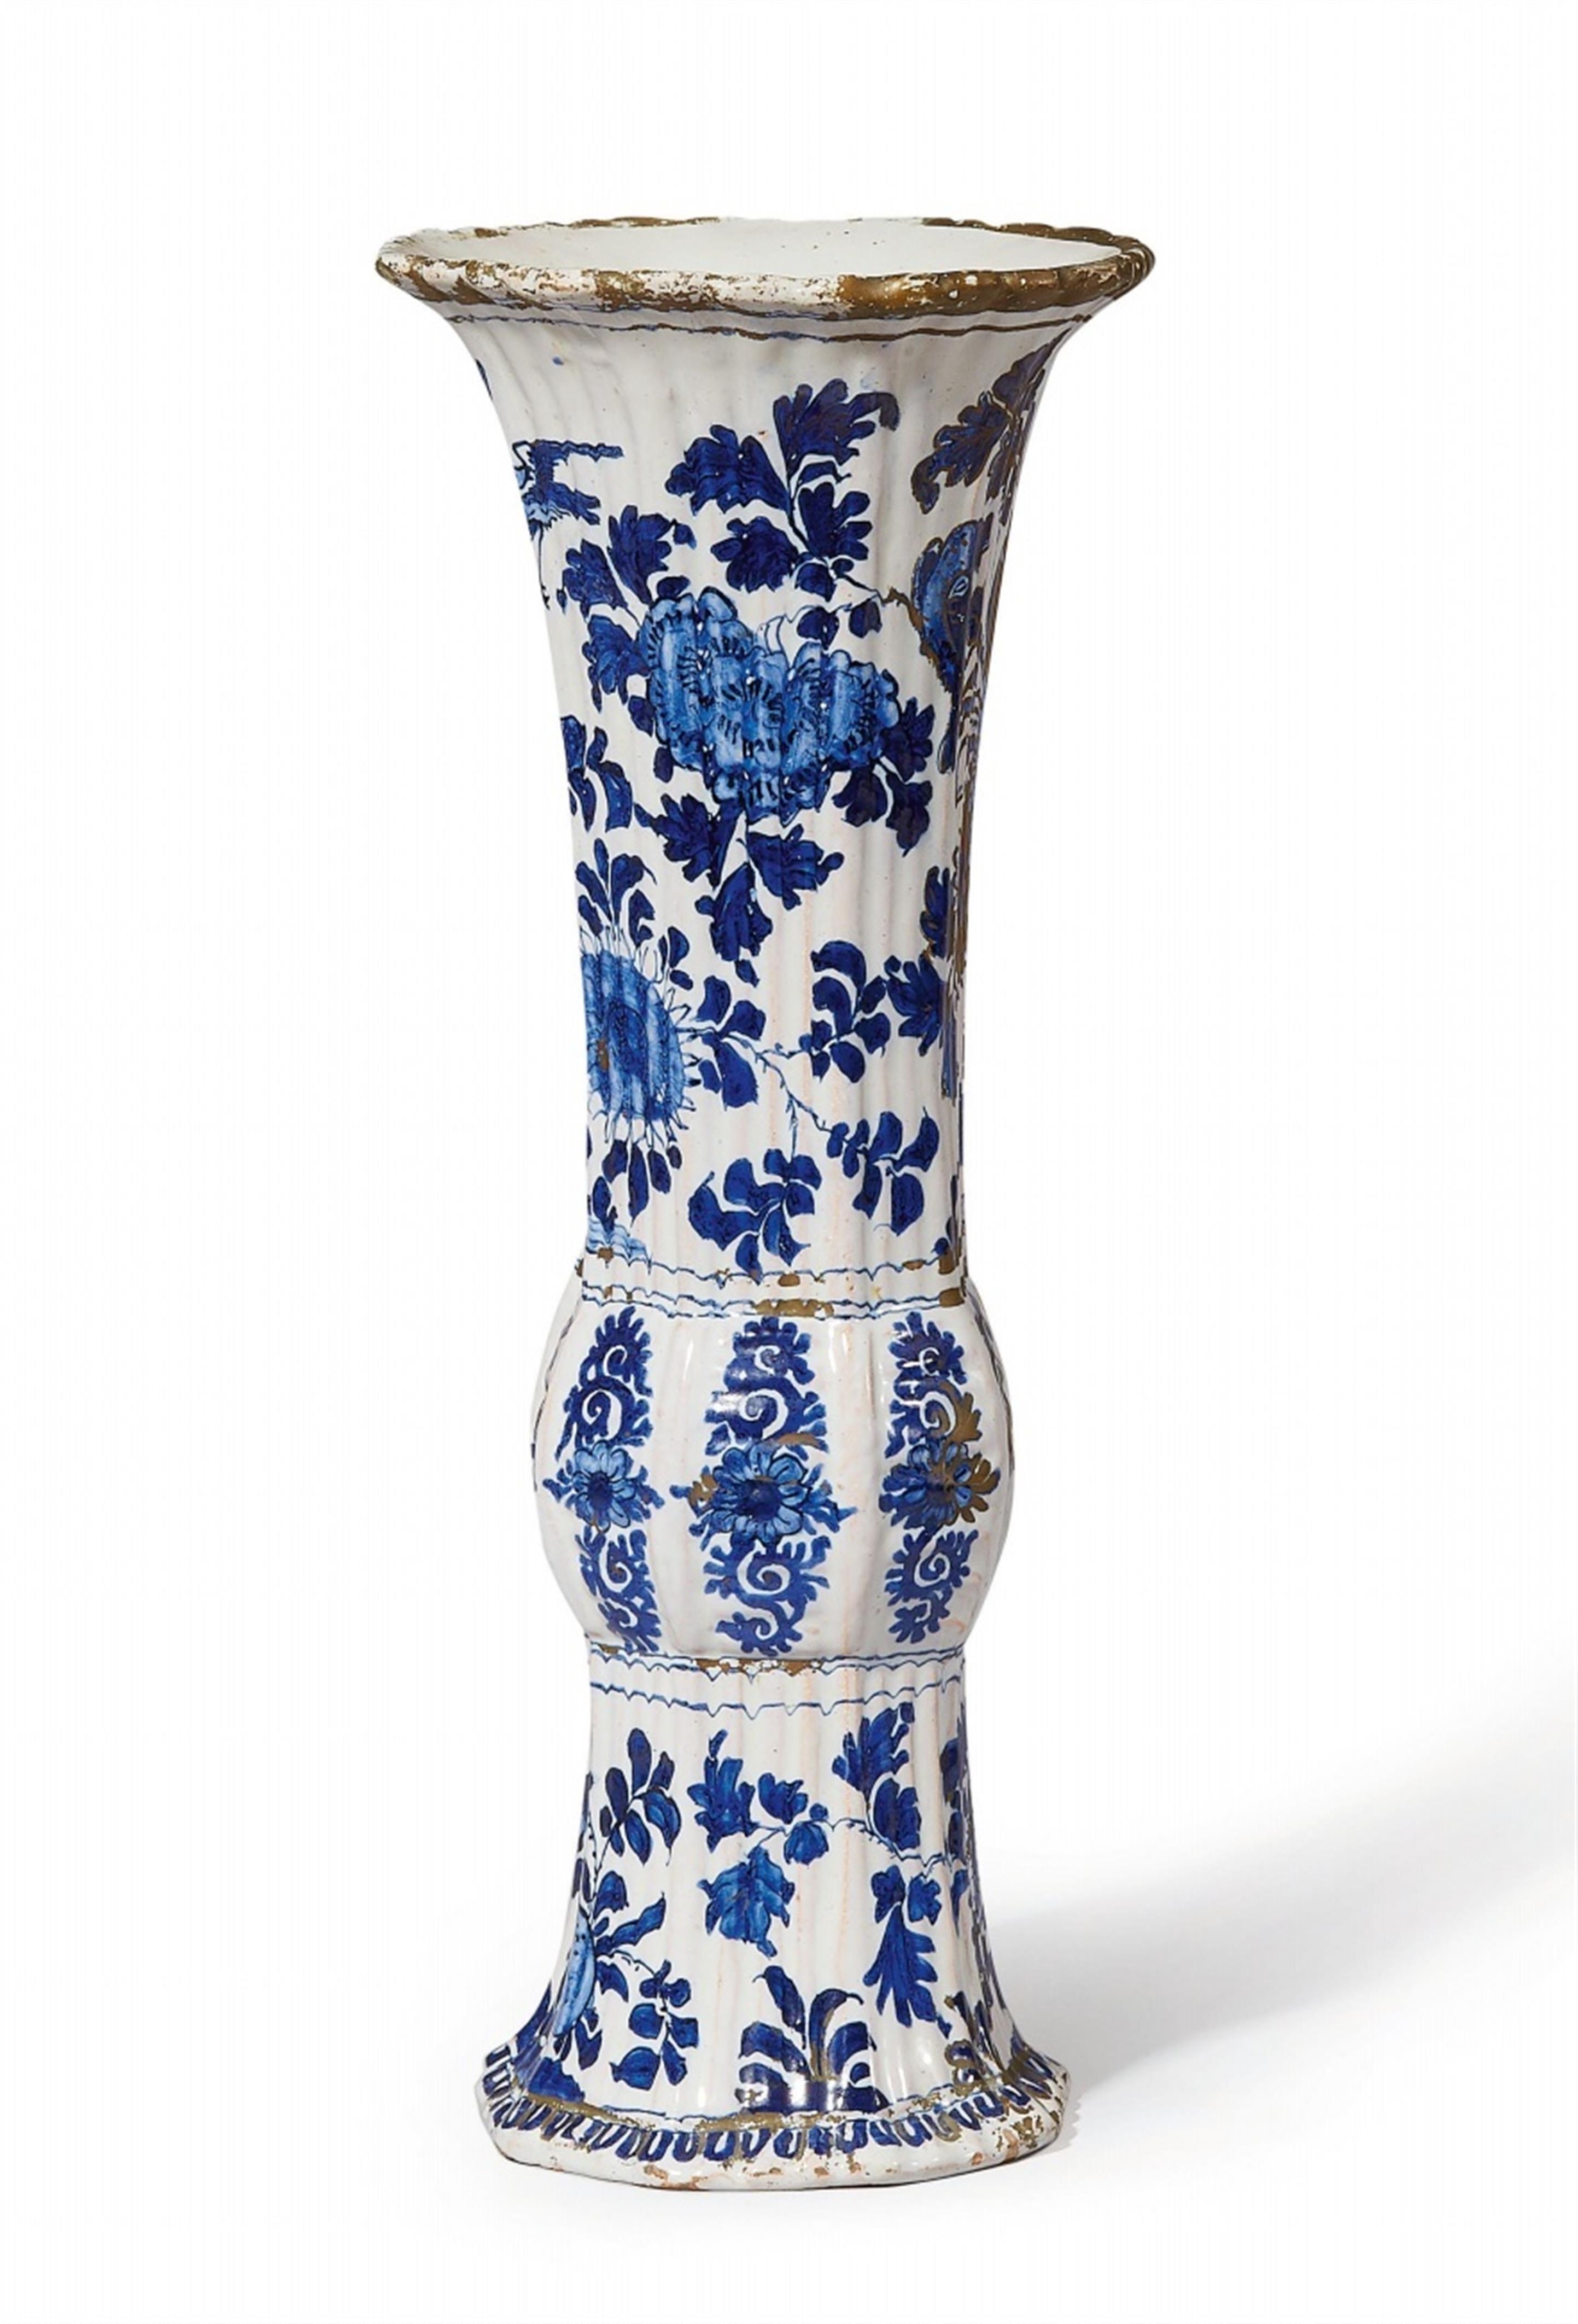 A rare Berlin faience trumpet vase with lacquer decor - image-1